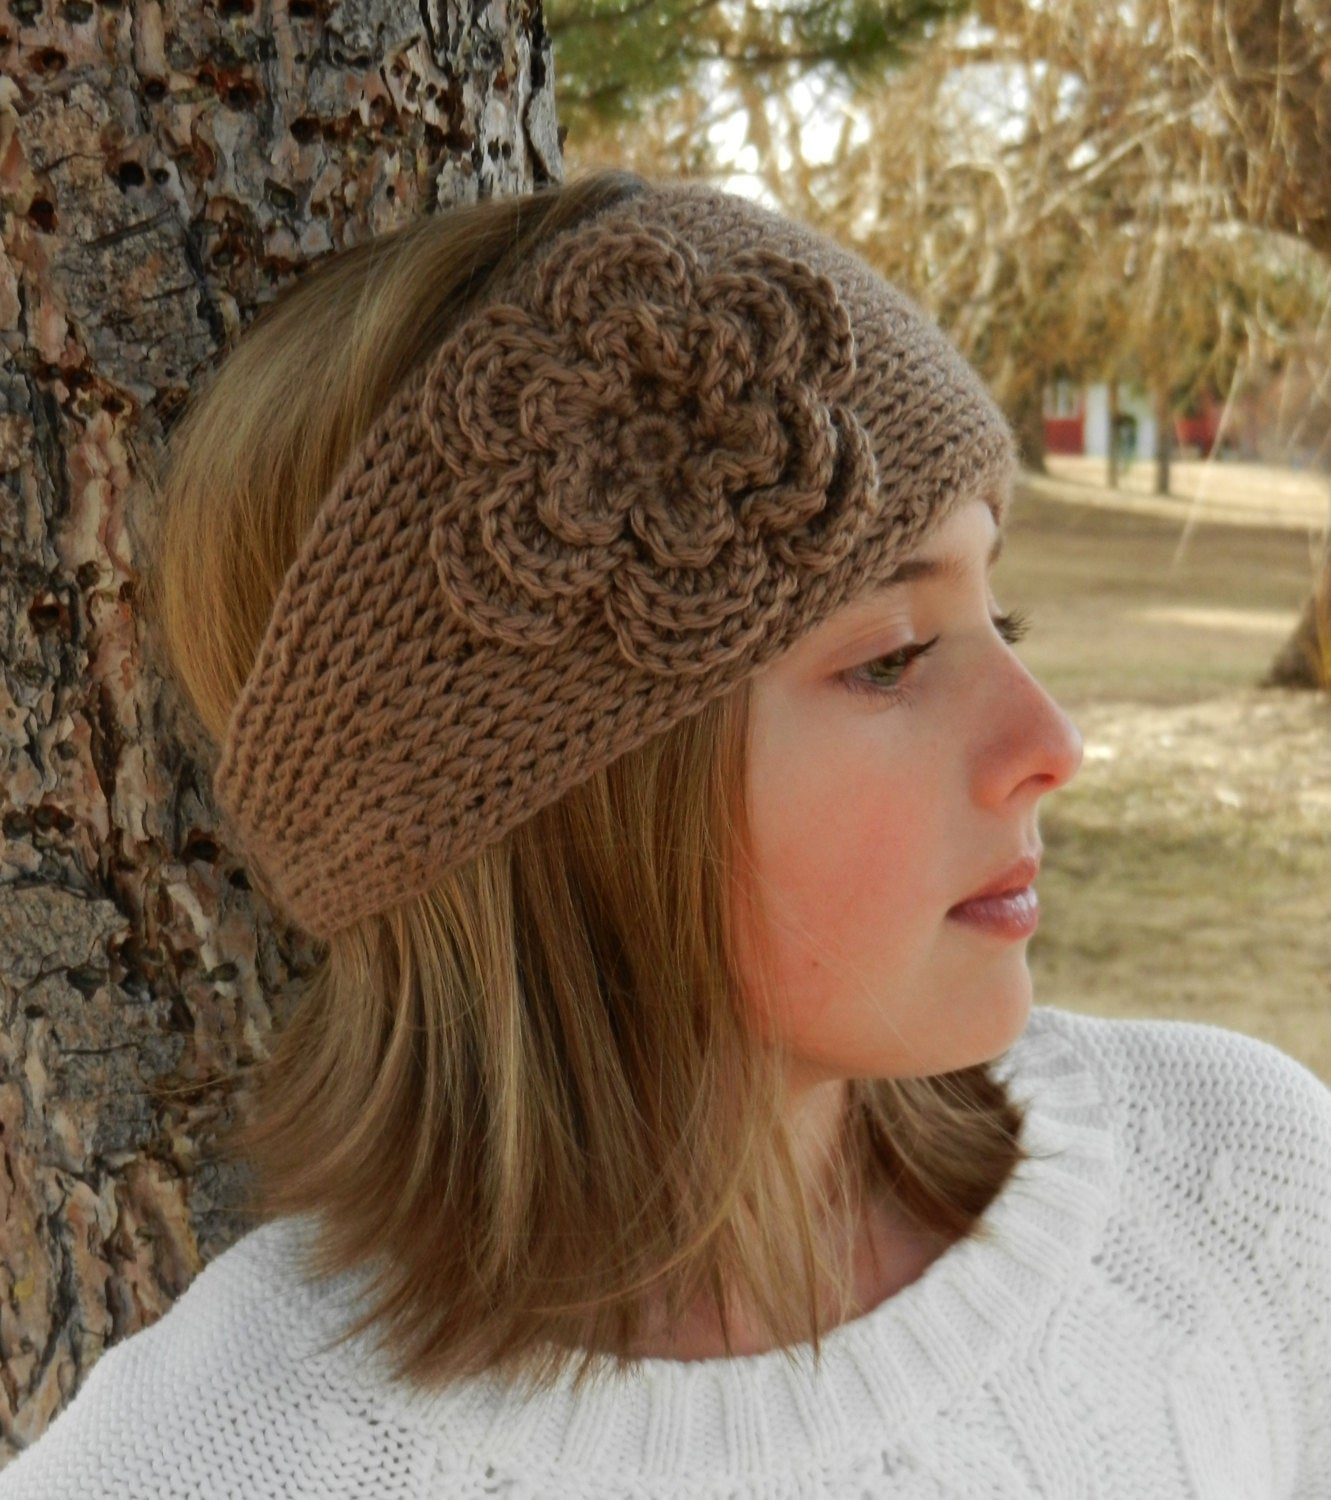 Knitted Headband With Flower Pattern Tunisian Knit Look Crochet Headband Pattern With Flower Tunisian Crochet Headband Earwarmer Pattern With Flower Instant Download